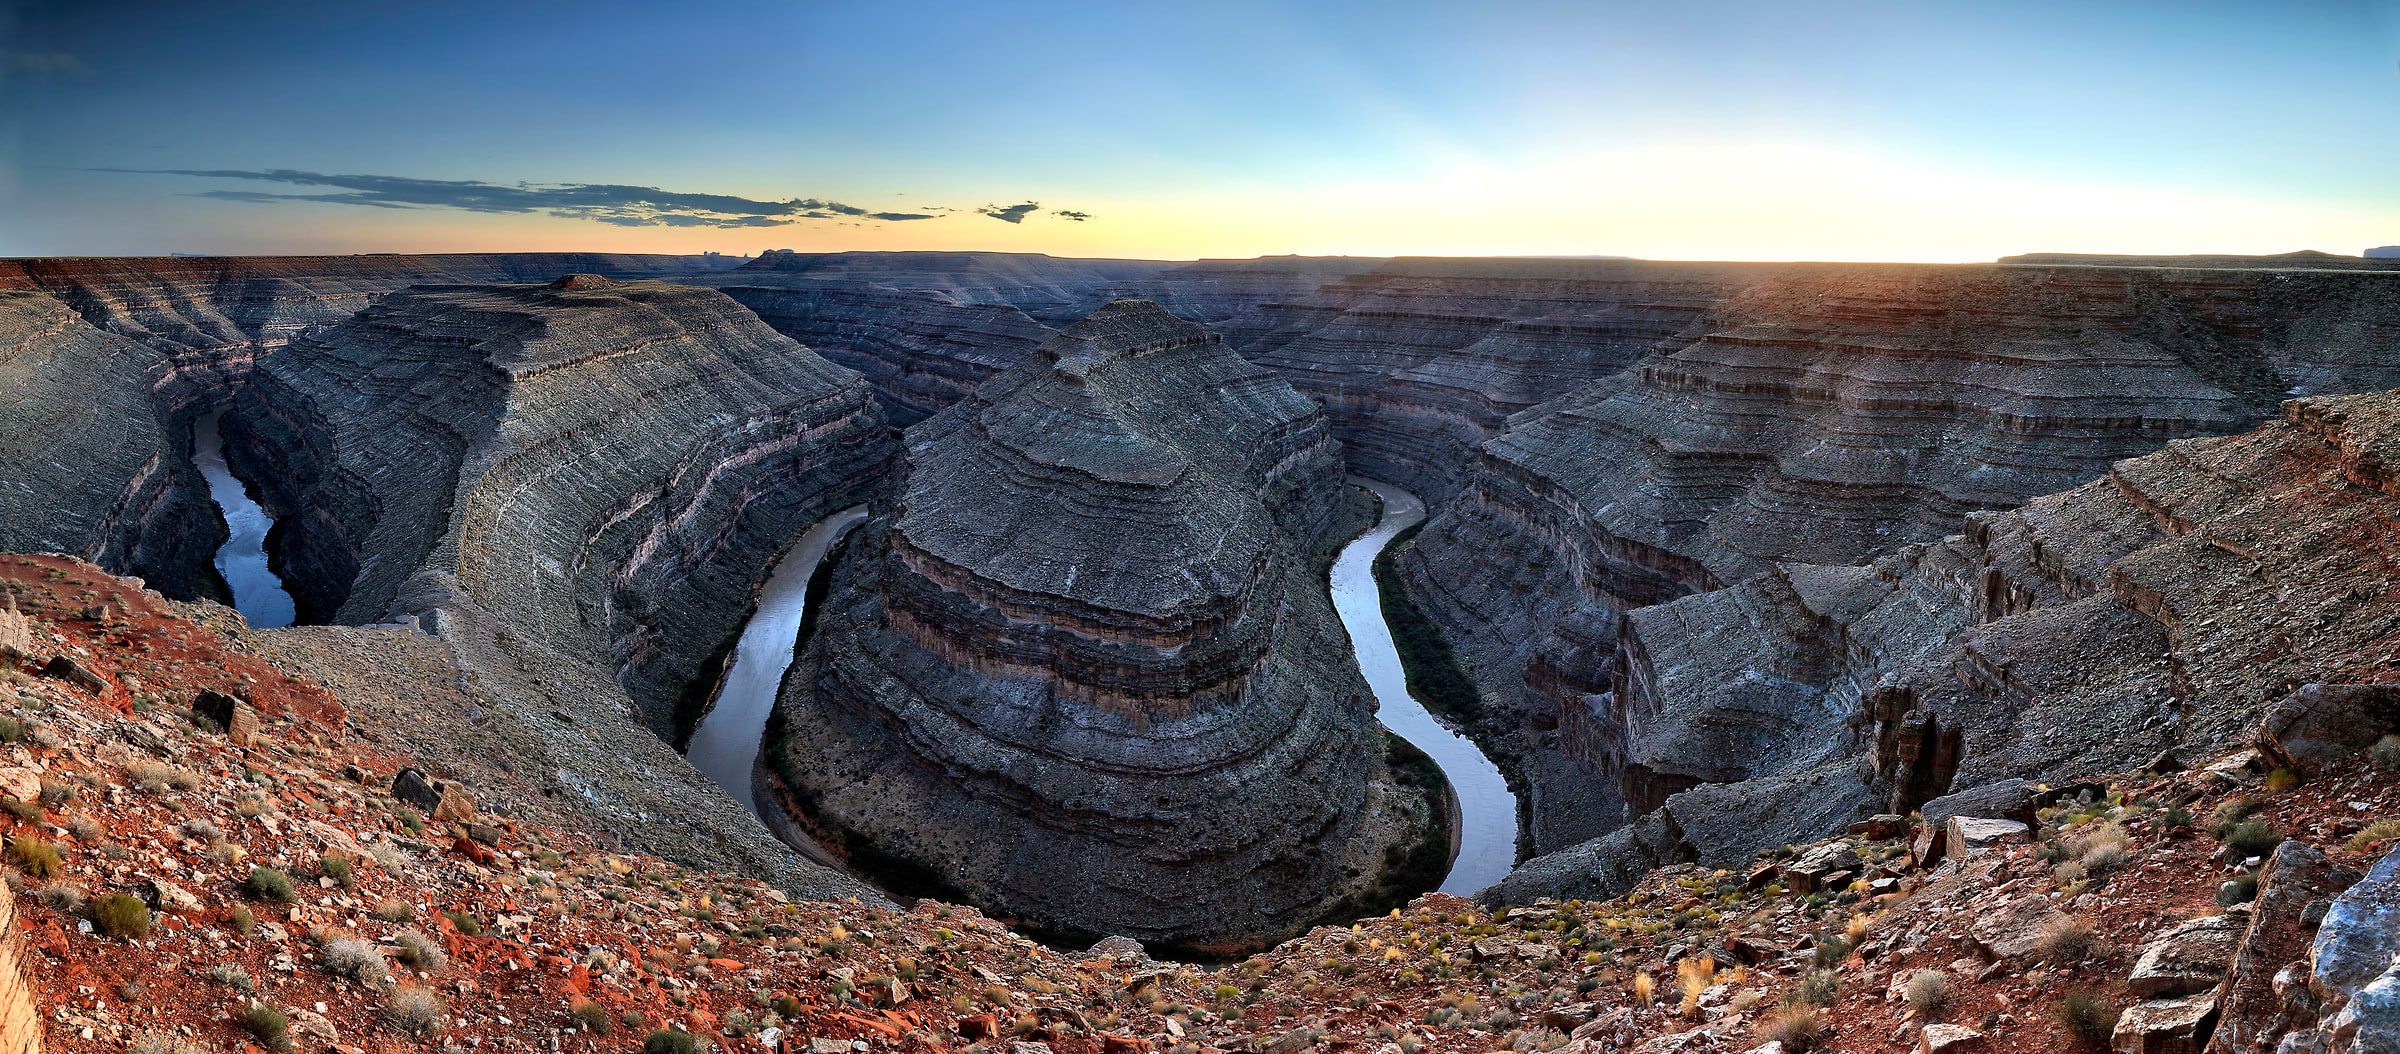 258 megapixels! A very high resolution landscape panorama photo of a canyon; VAST photo created by Phil Crawshay in Goosenecks State Park, Utah 316, Mexican Hat, Utah